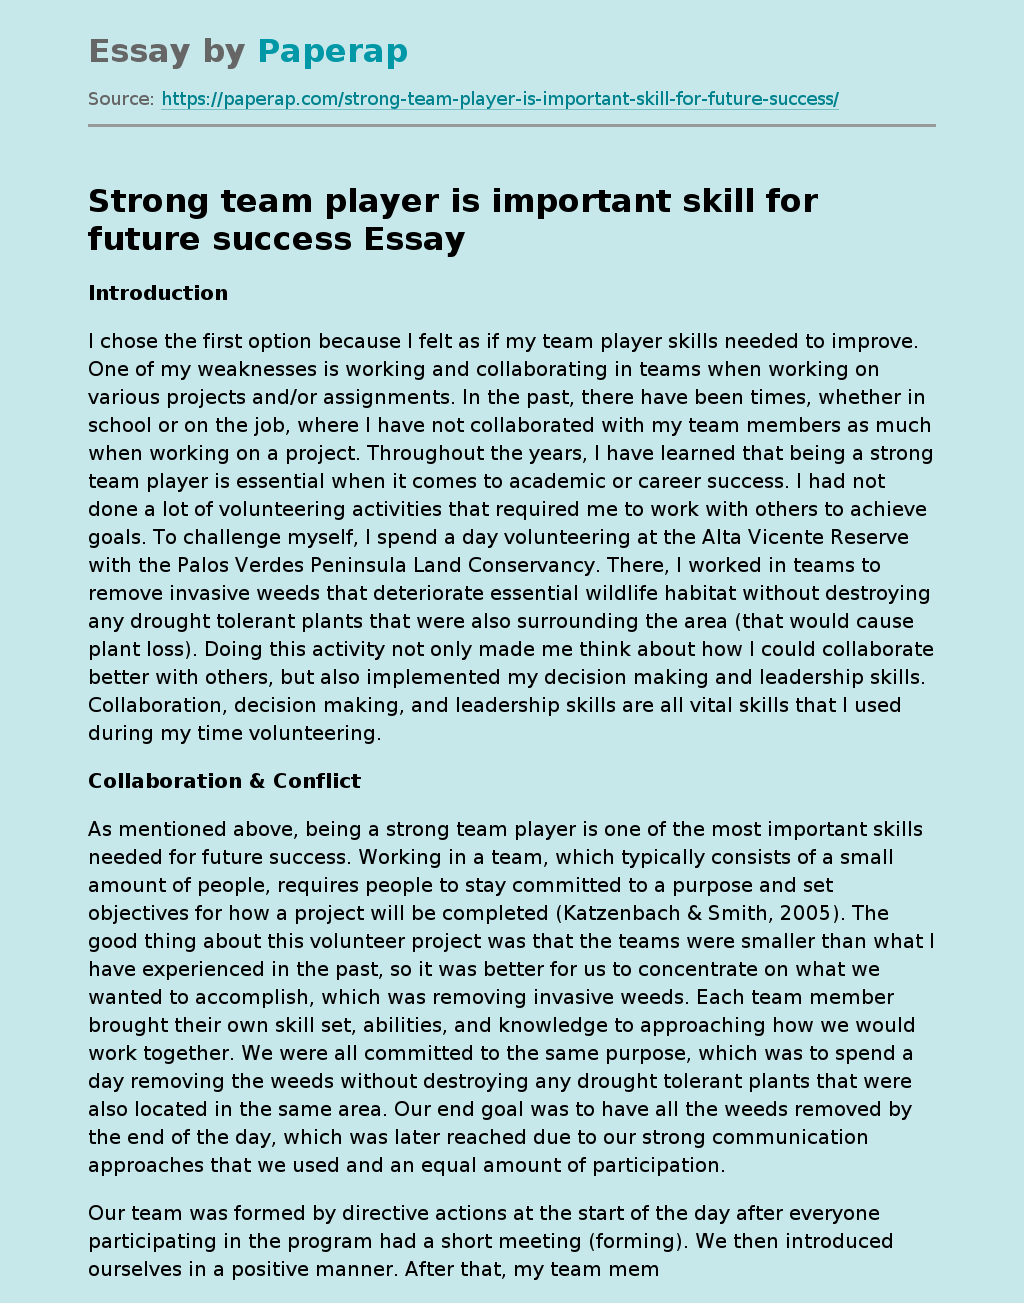 Strong team player is important skill for future success